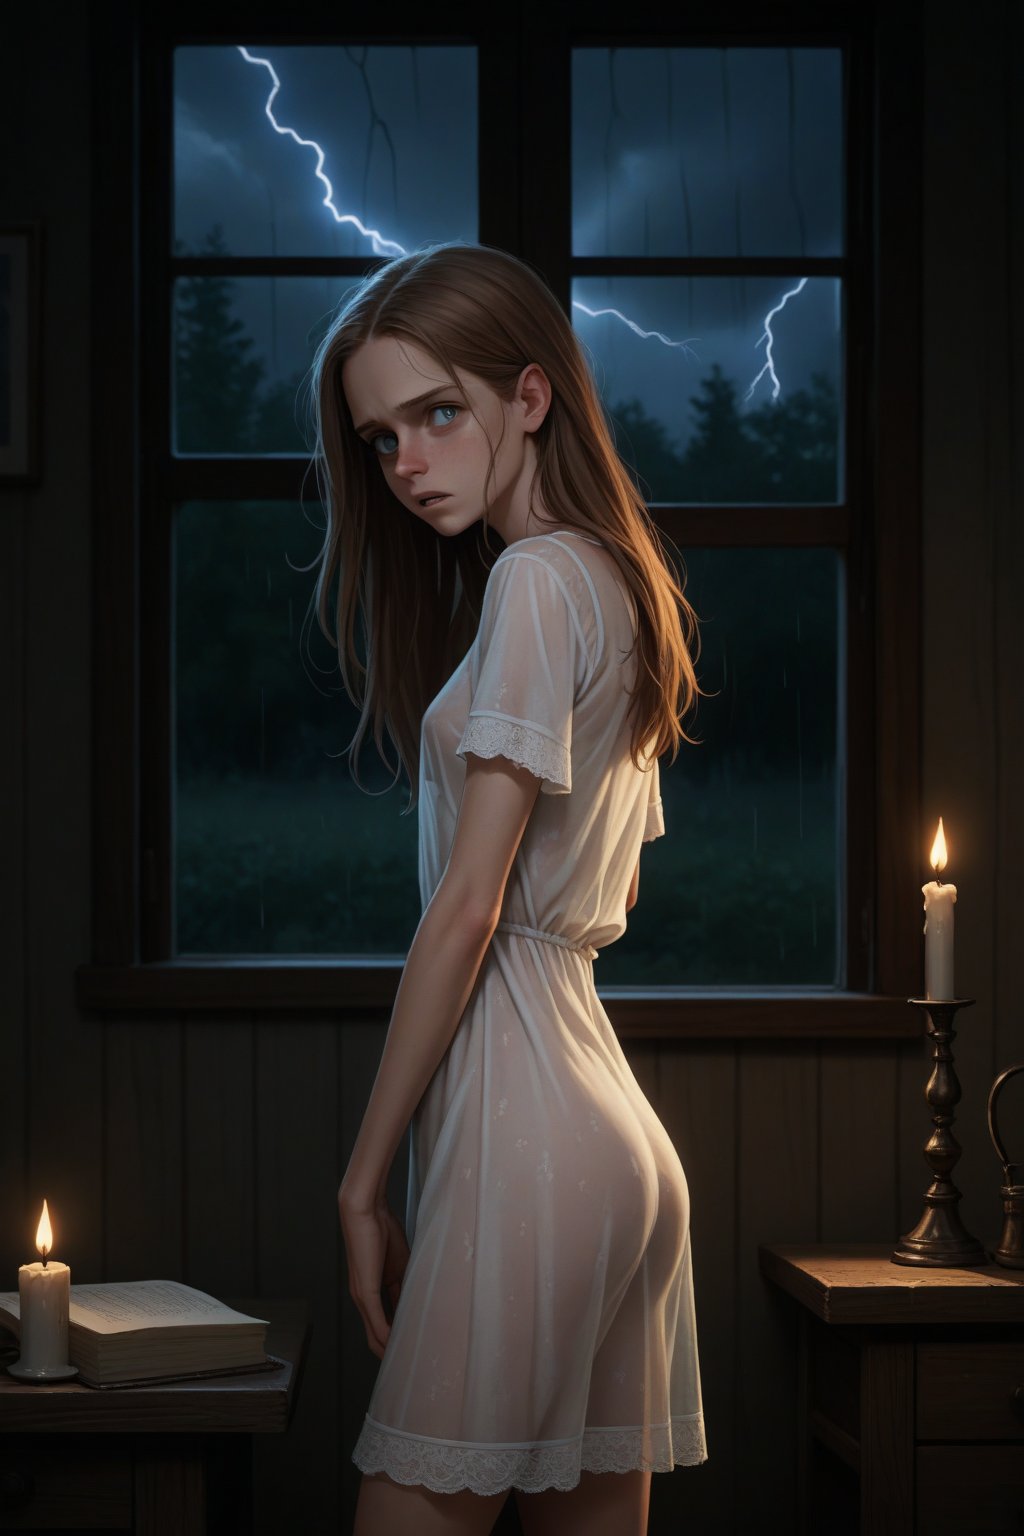 score_9, score_8_up, score_8, (solo), indoors, young girl,long hair,  see-through nightdress, cute, cel-shading, fca style, standing, night, candlelight, (too scared to sleep), sleepy, scary, (cowboy shot), side view, (looking back), score_7_up, lightning, storm, source_realistic, insaneres